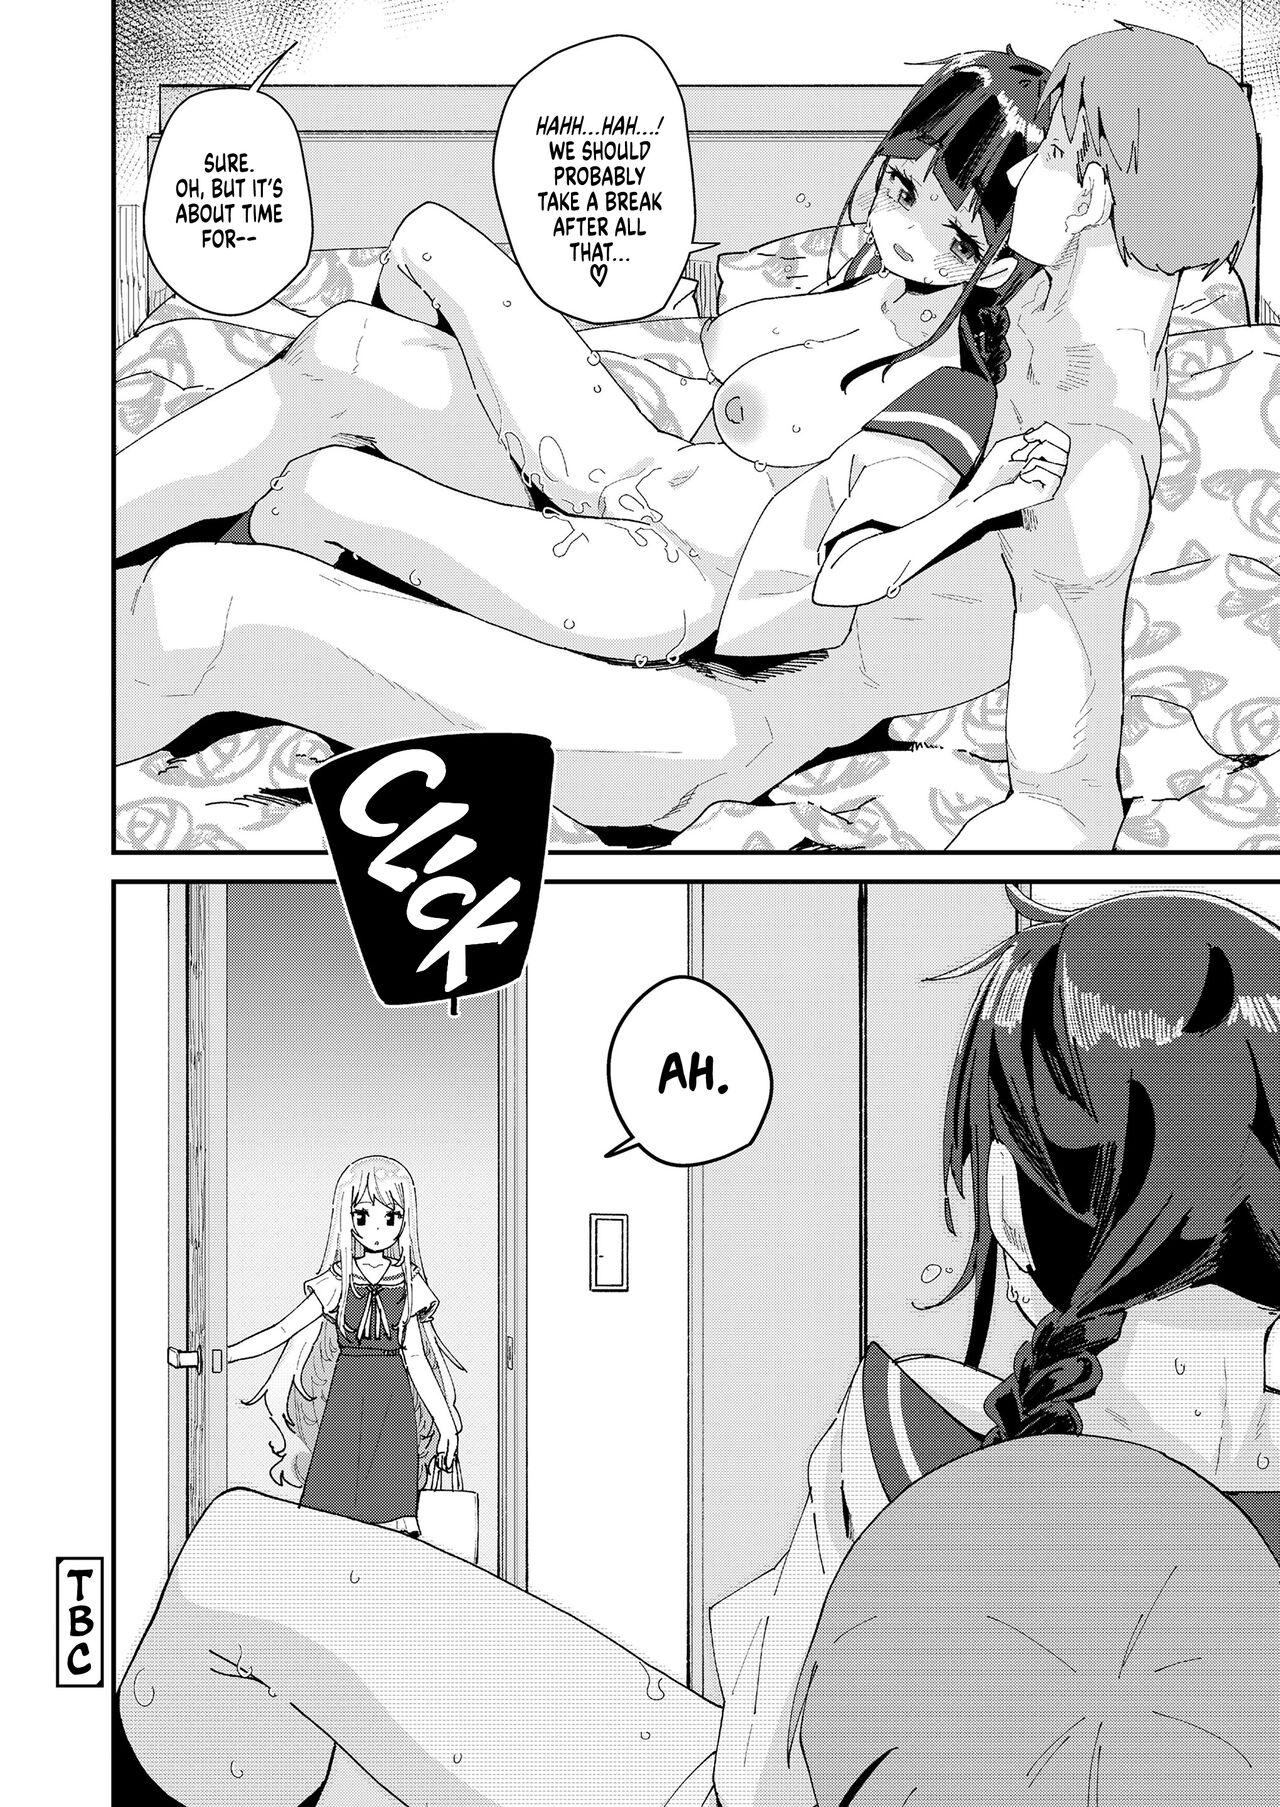 Slave Mitsu to Chou 3 | Nectar & Butterfly 3 Best Blowjob Ever - Page 24